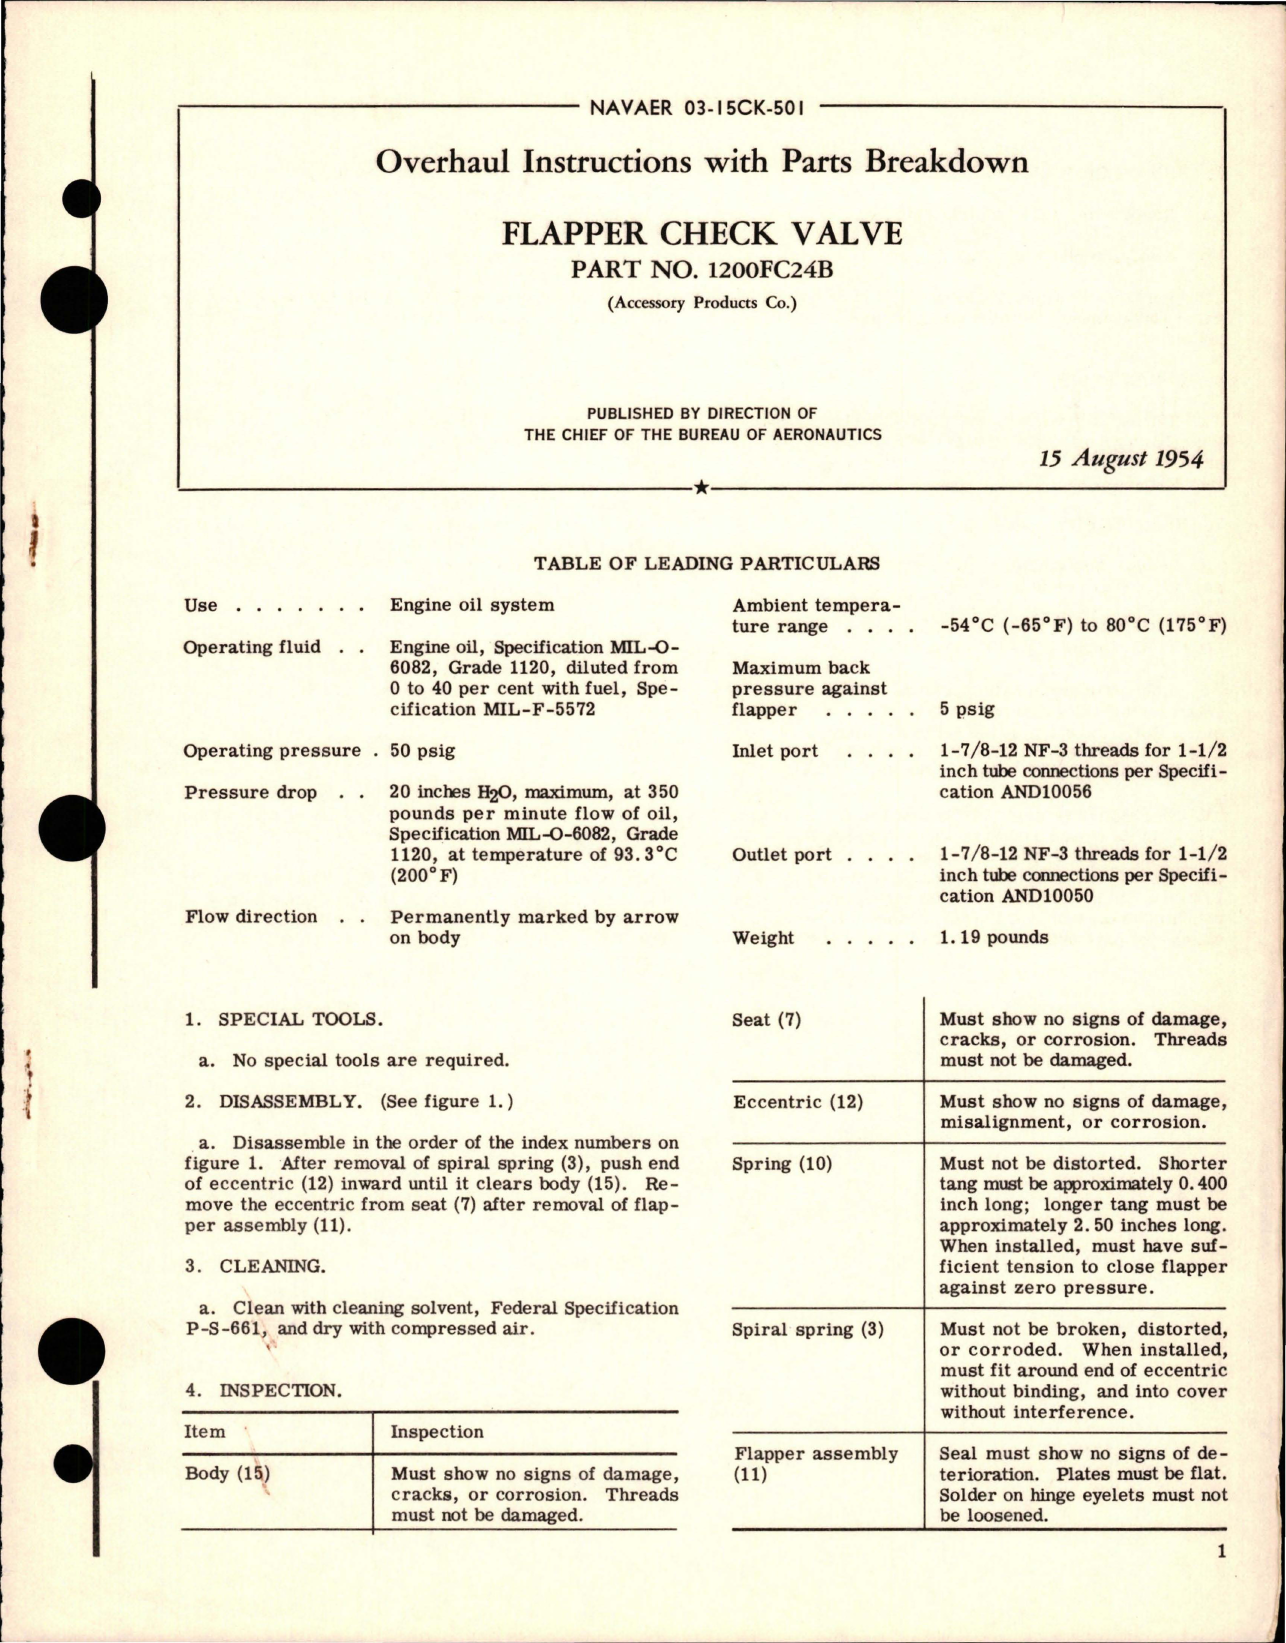 Sample page 1 from AirCorps Library document: Overhaul Instructions with Parts Breakdown for Flapper Check Valve - Part 1200FC24B